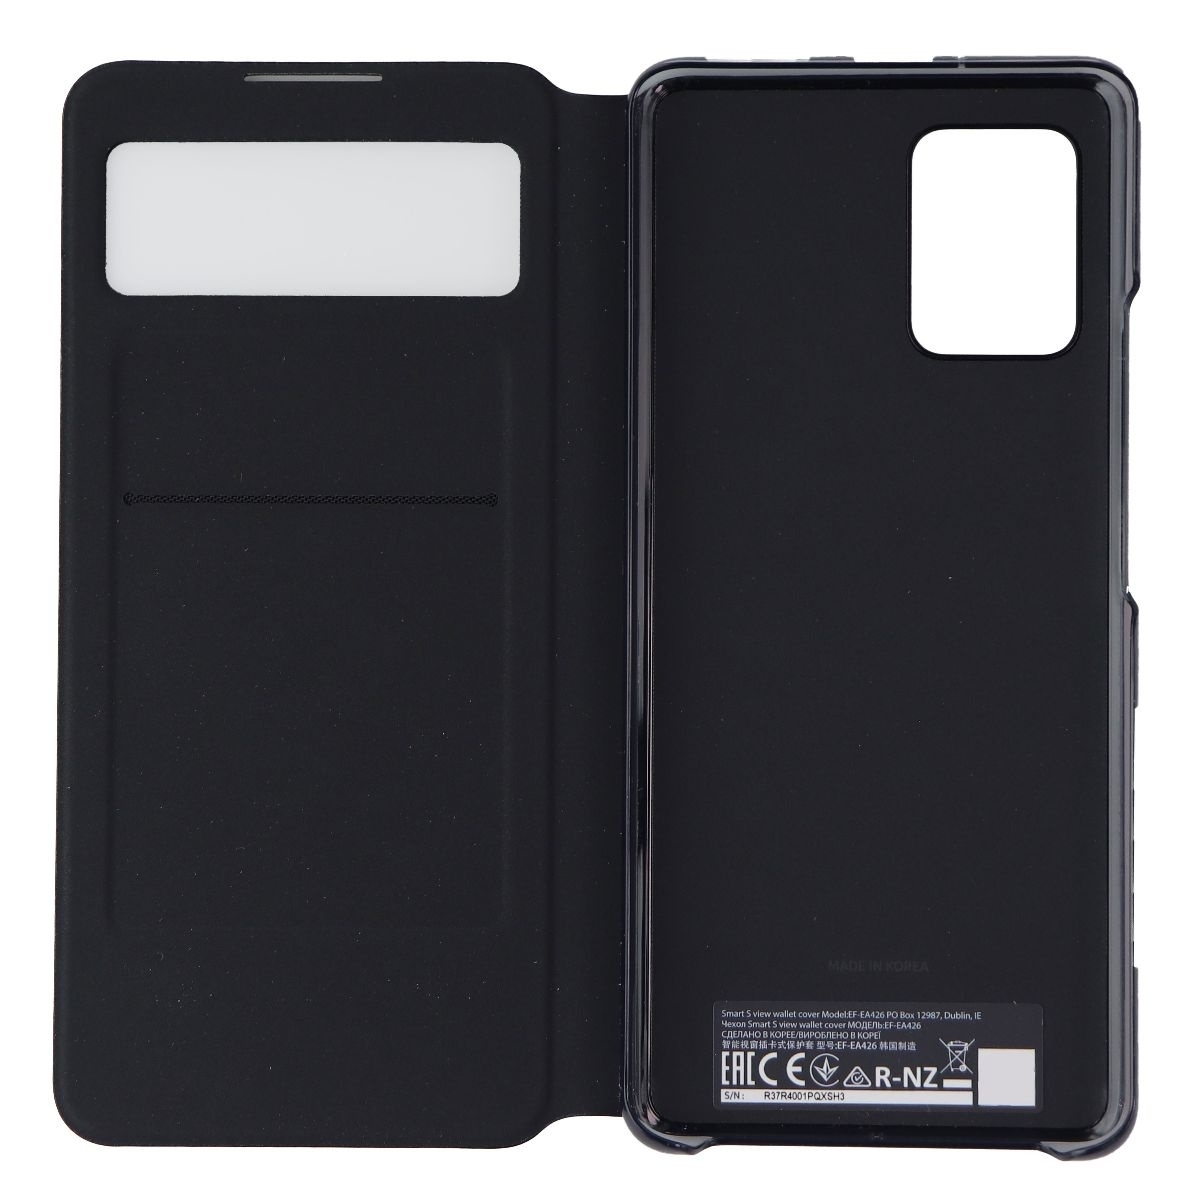 Samsung Smart S View Wallet Cover For Galaxy A42 5G - Black (EF-EA426PBEVZW)